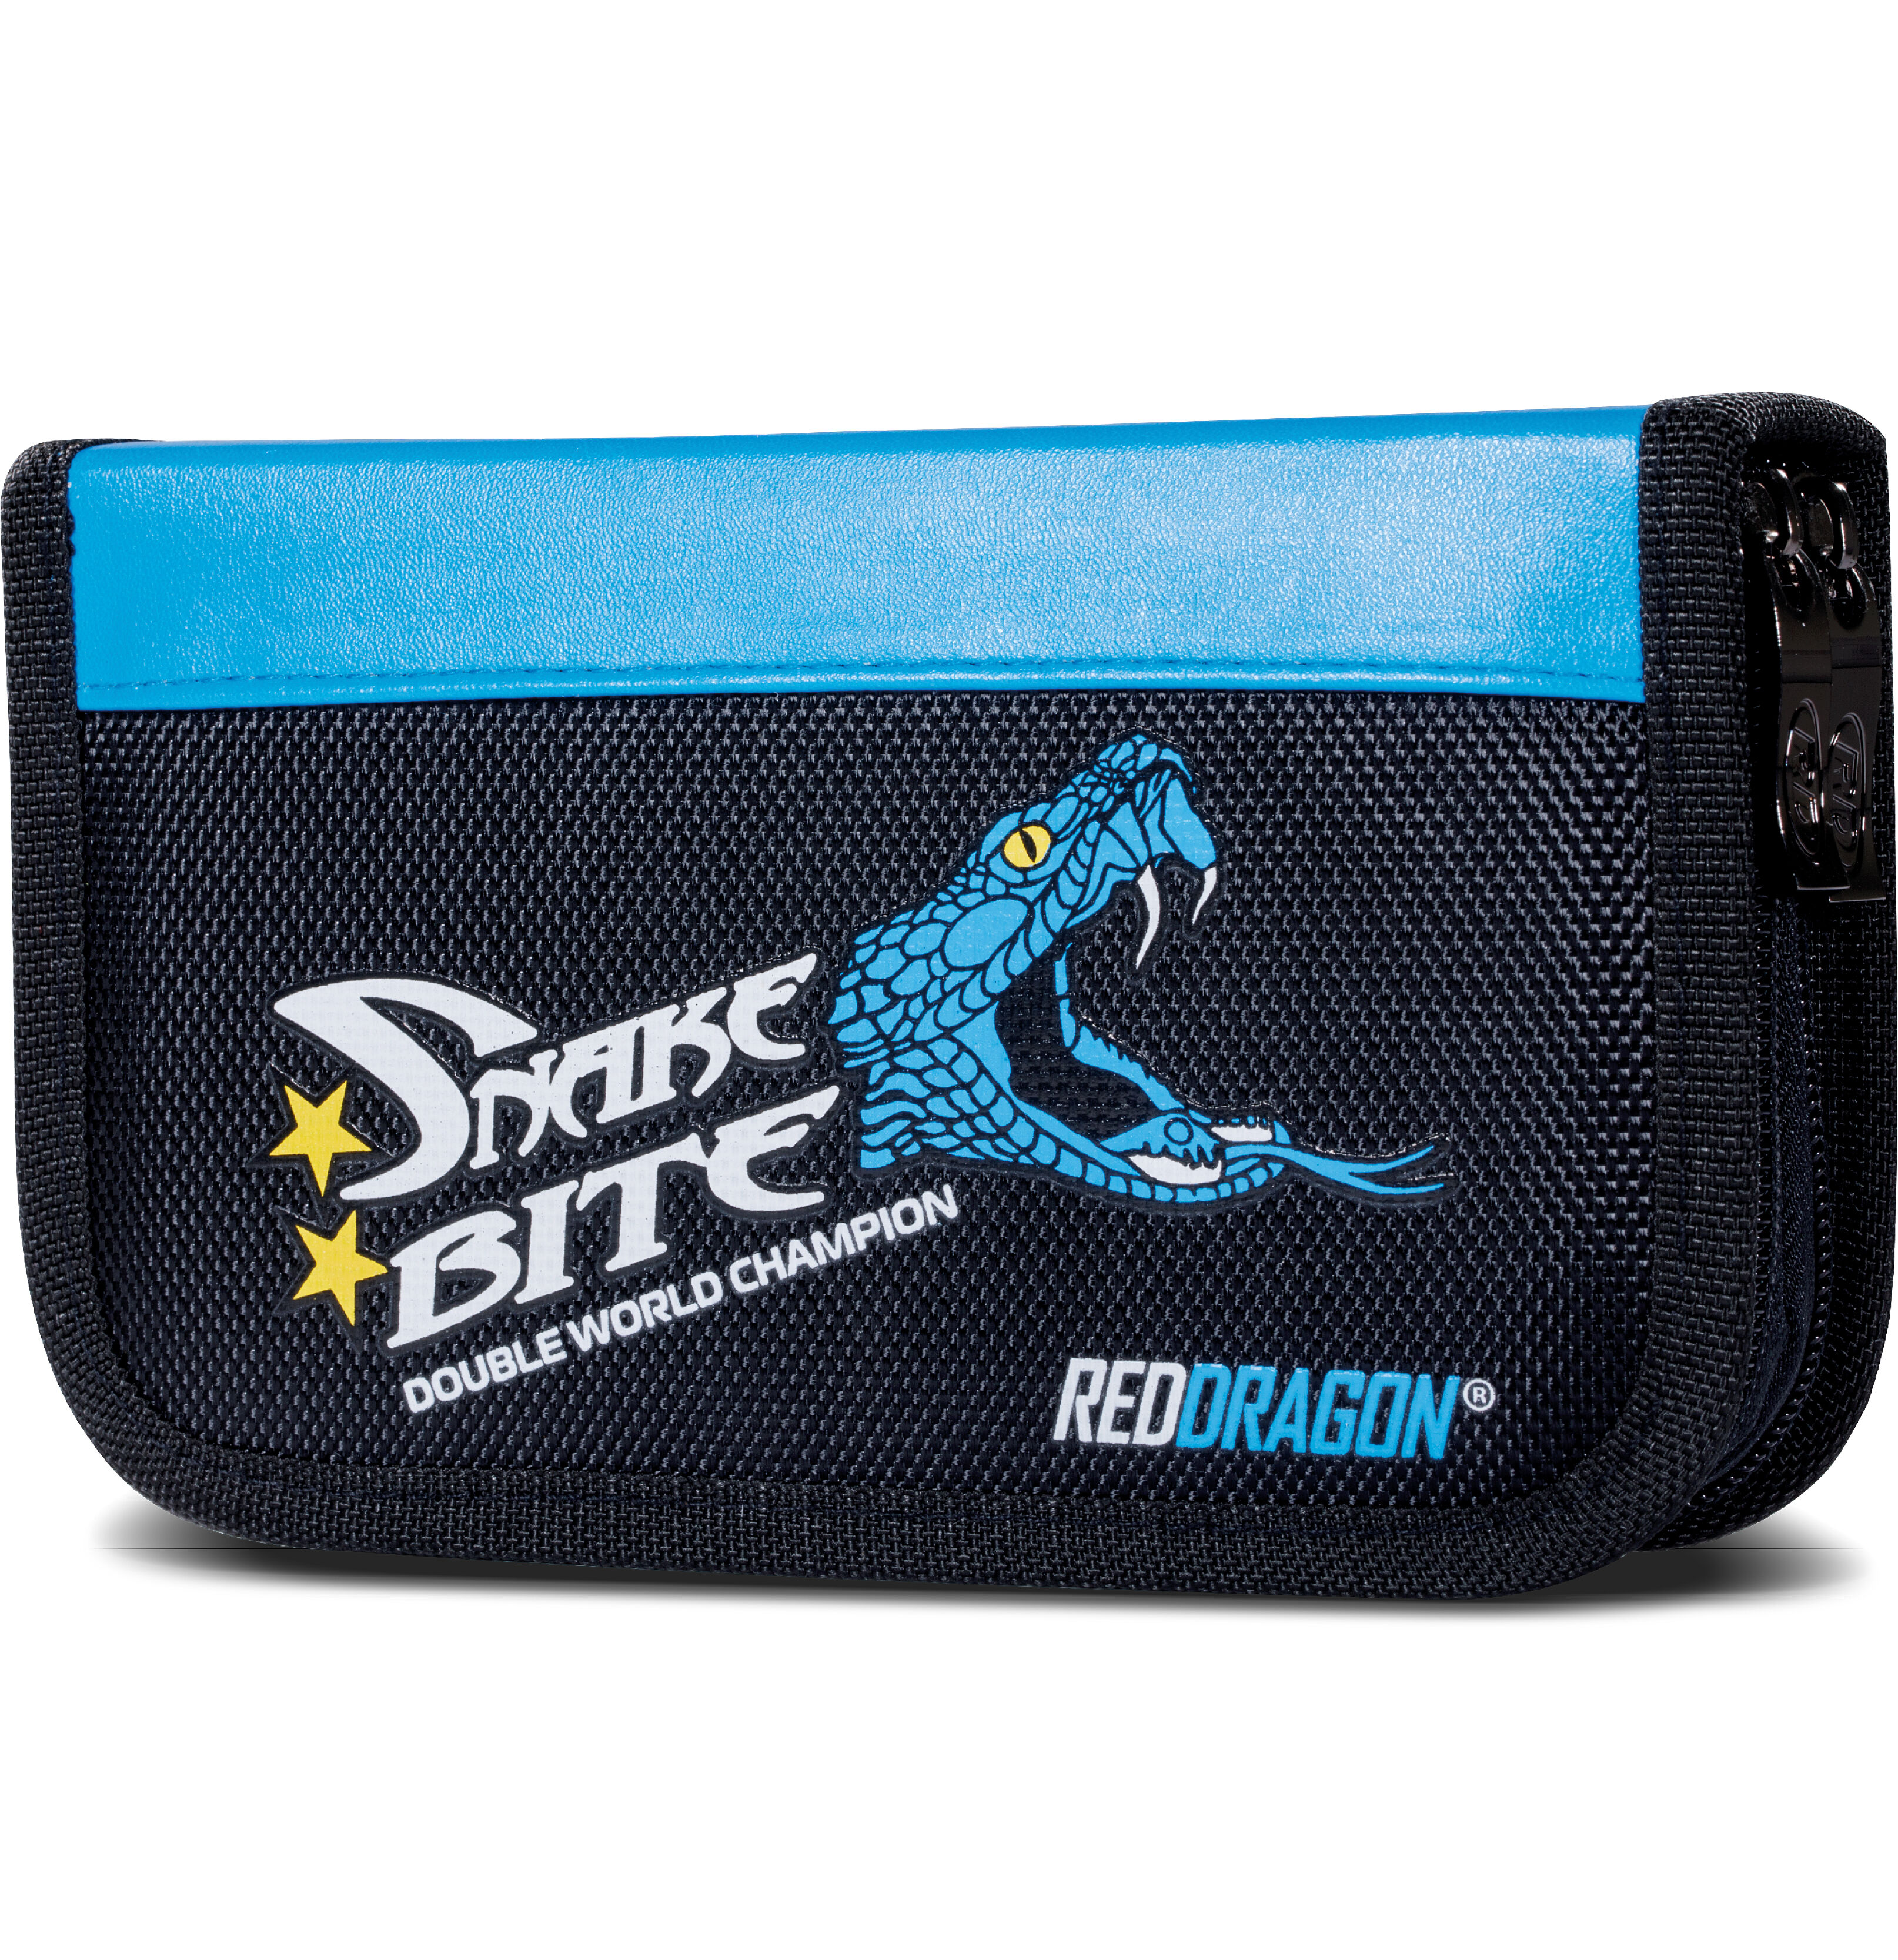 Red Dragon - Peter Wright - Firestone 2 Wallet